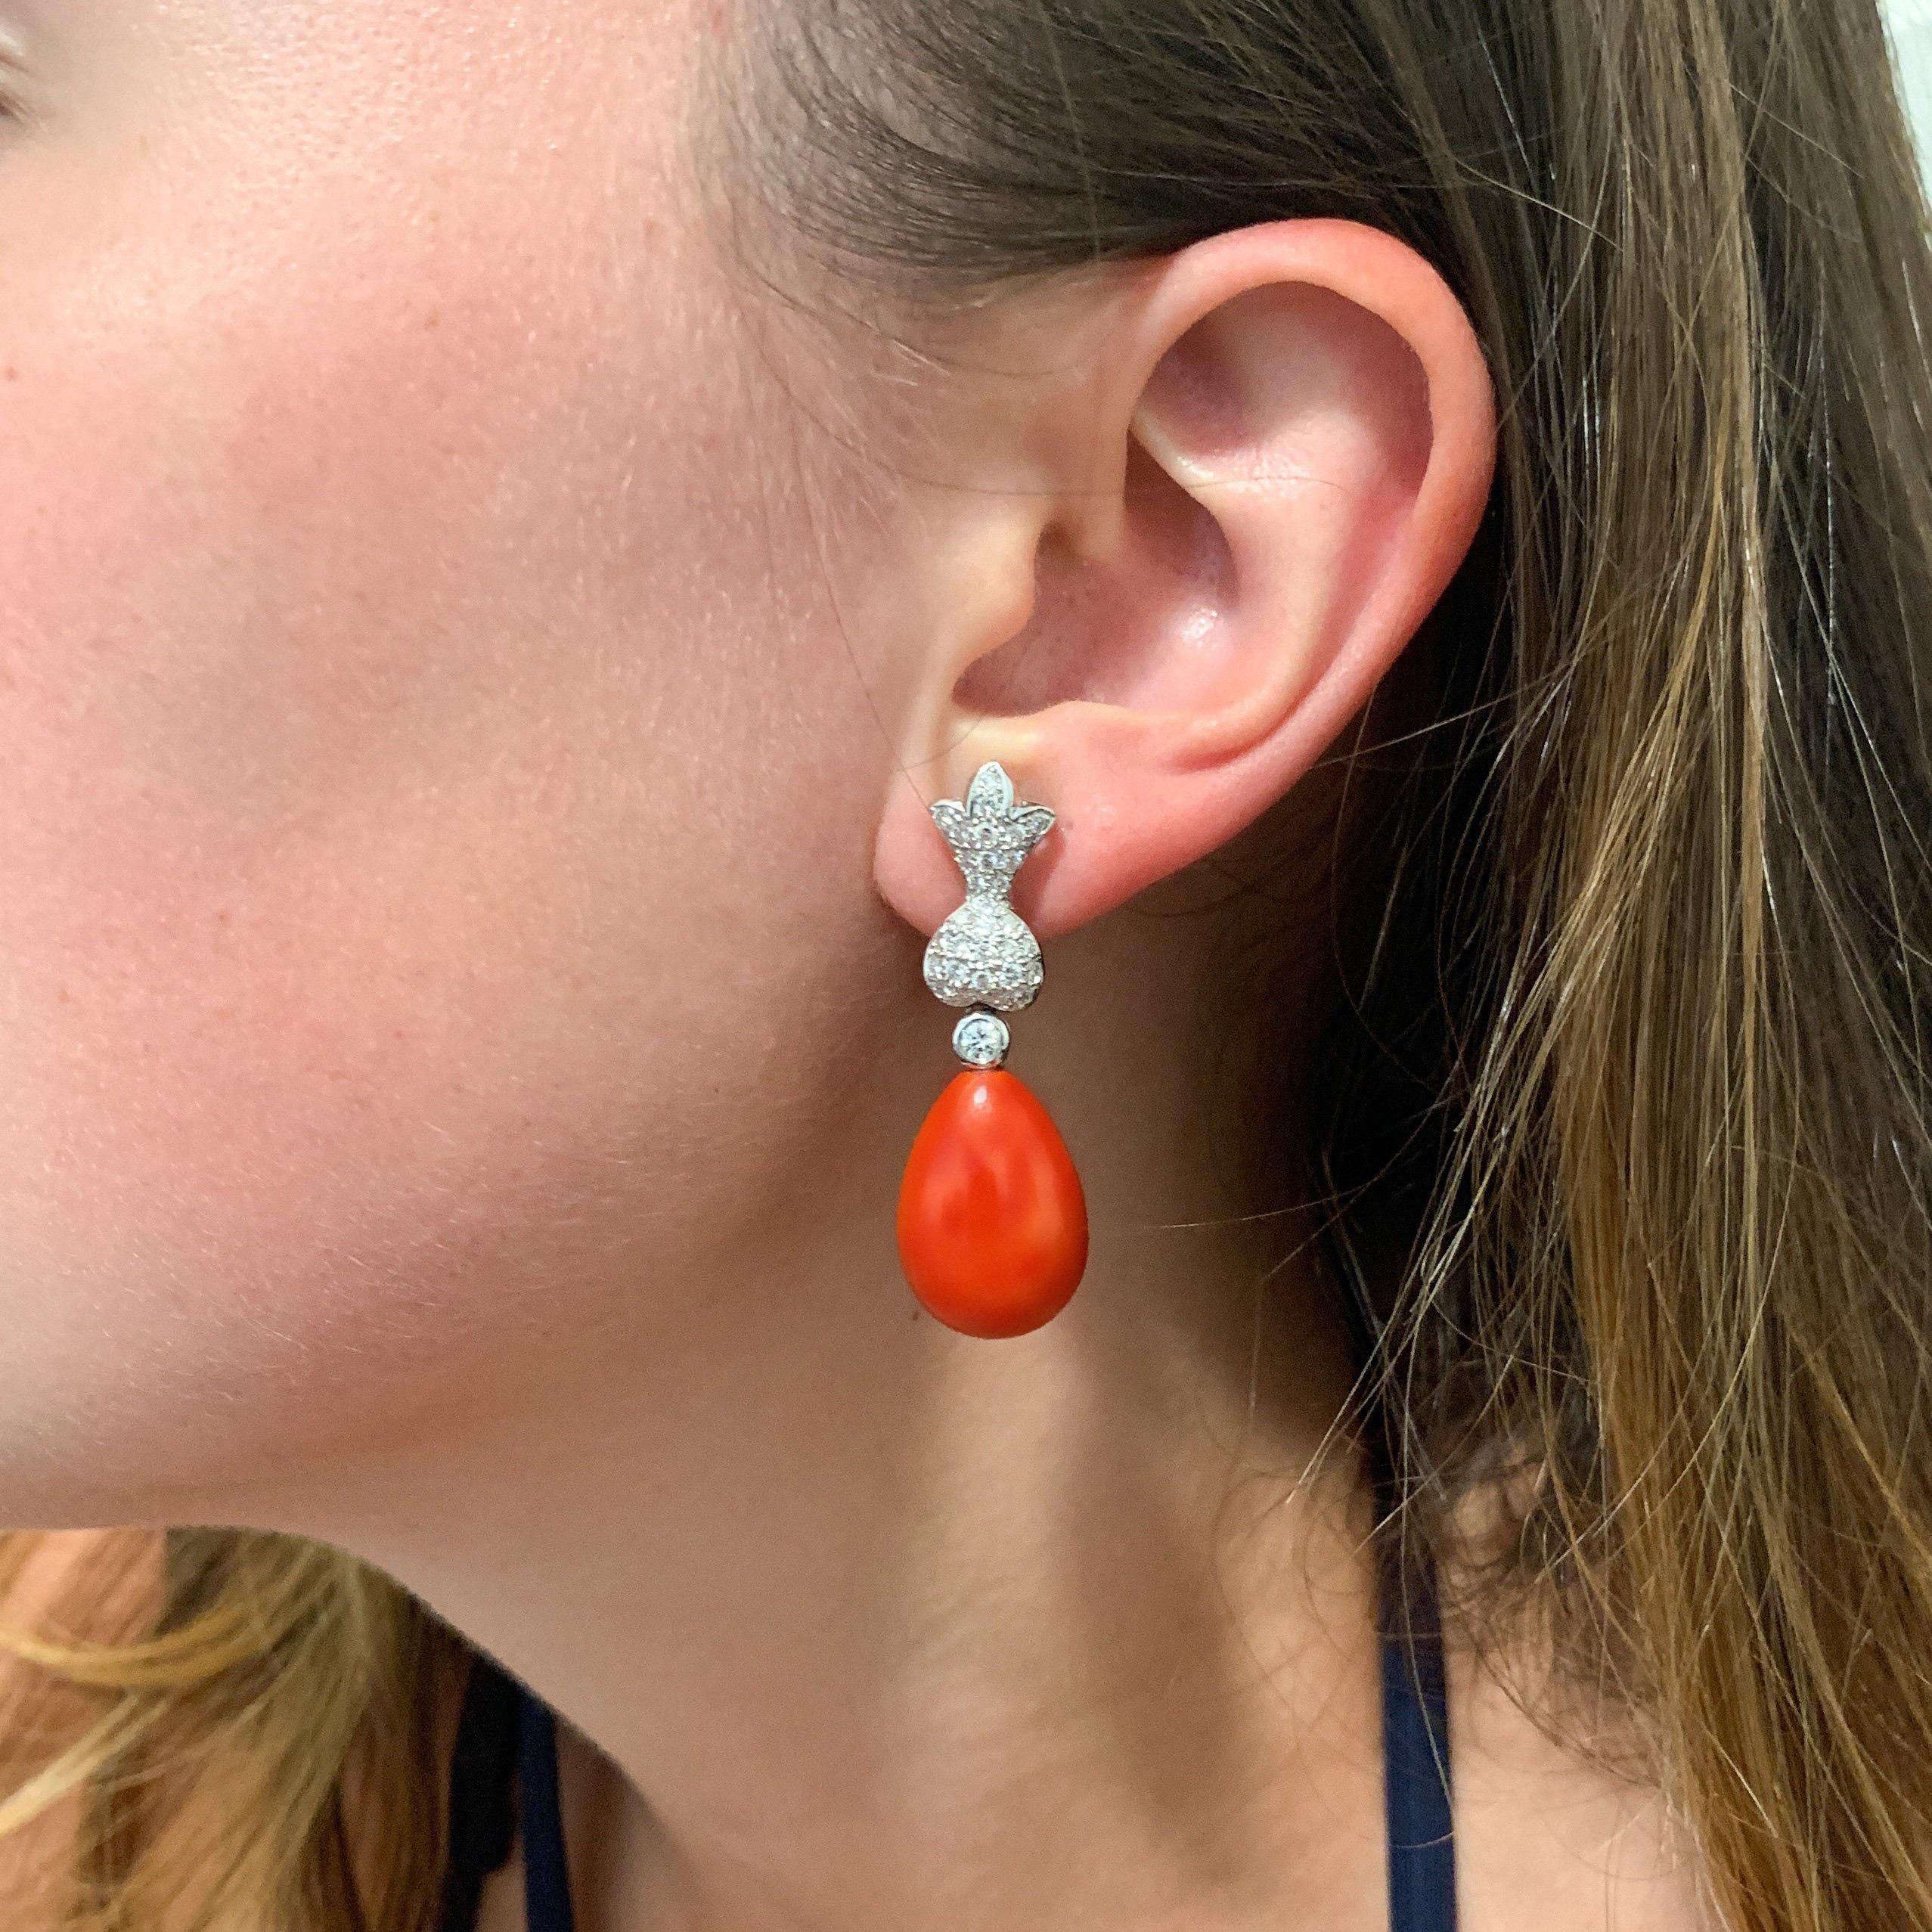 These fine Italian oxblood coral and diamond earrings are elegance at its finest. The beautifully matched coral earrings show off a deep orangy-red hue that is carried evenly throughout both earrings. Minute areas of white on the back and side show